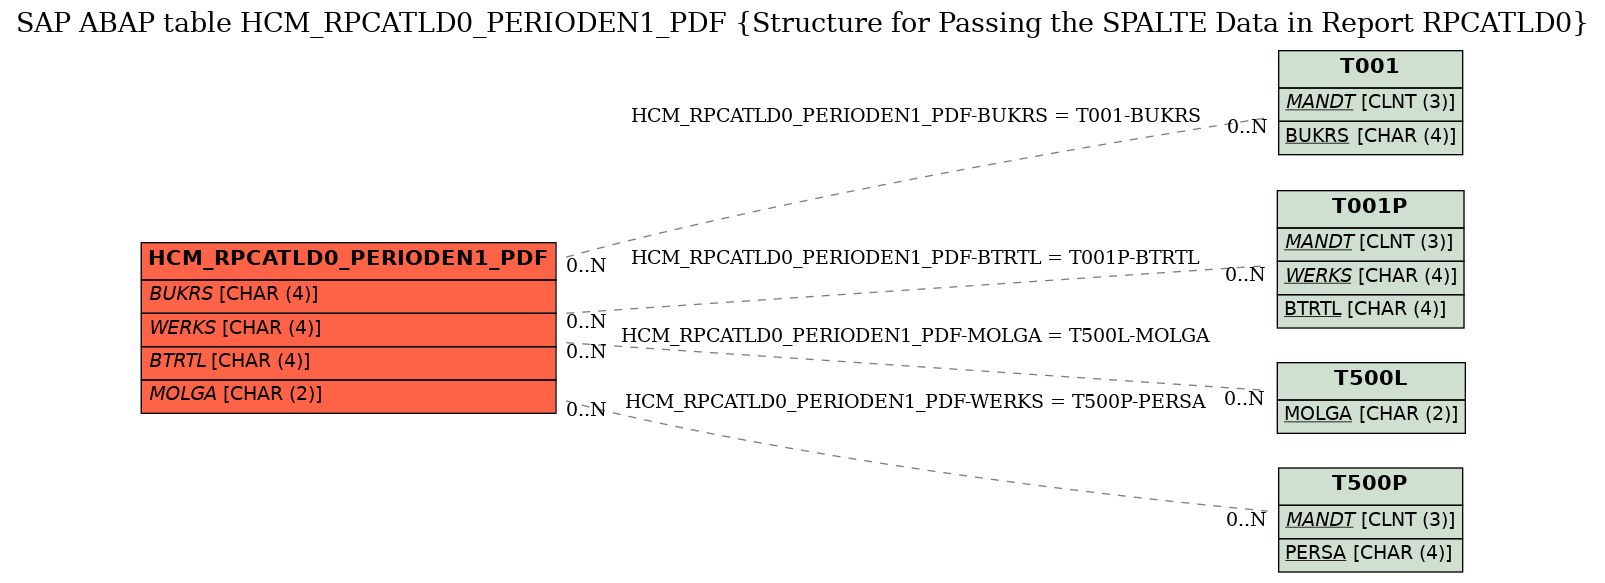 E-R Diagram for table HCM_RPCATLD0_PERIODEN1_PDF (Structure for Passing the SPALTE Data in Report RPCATLD0)